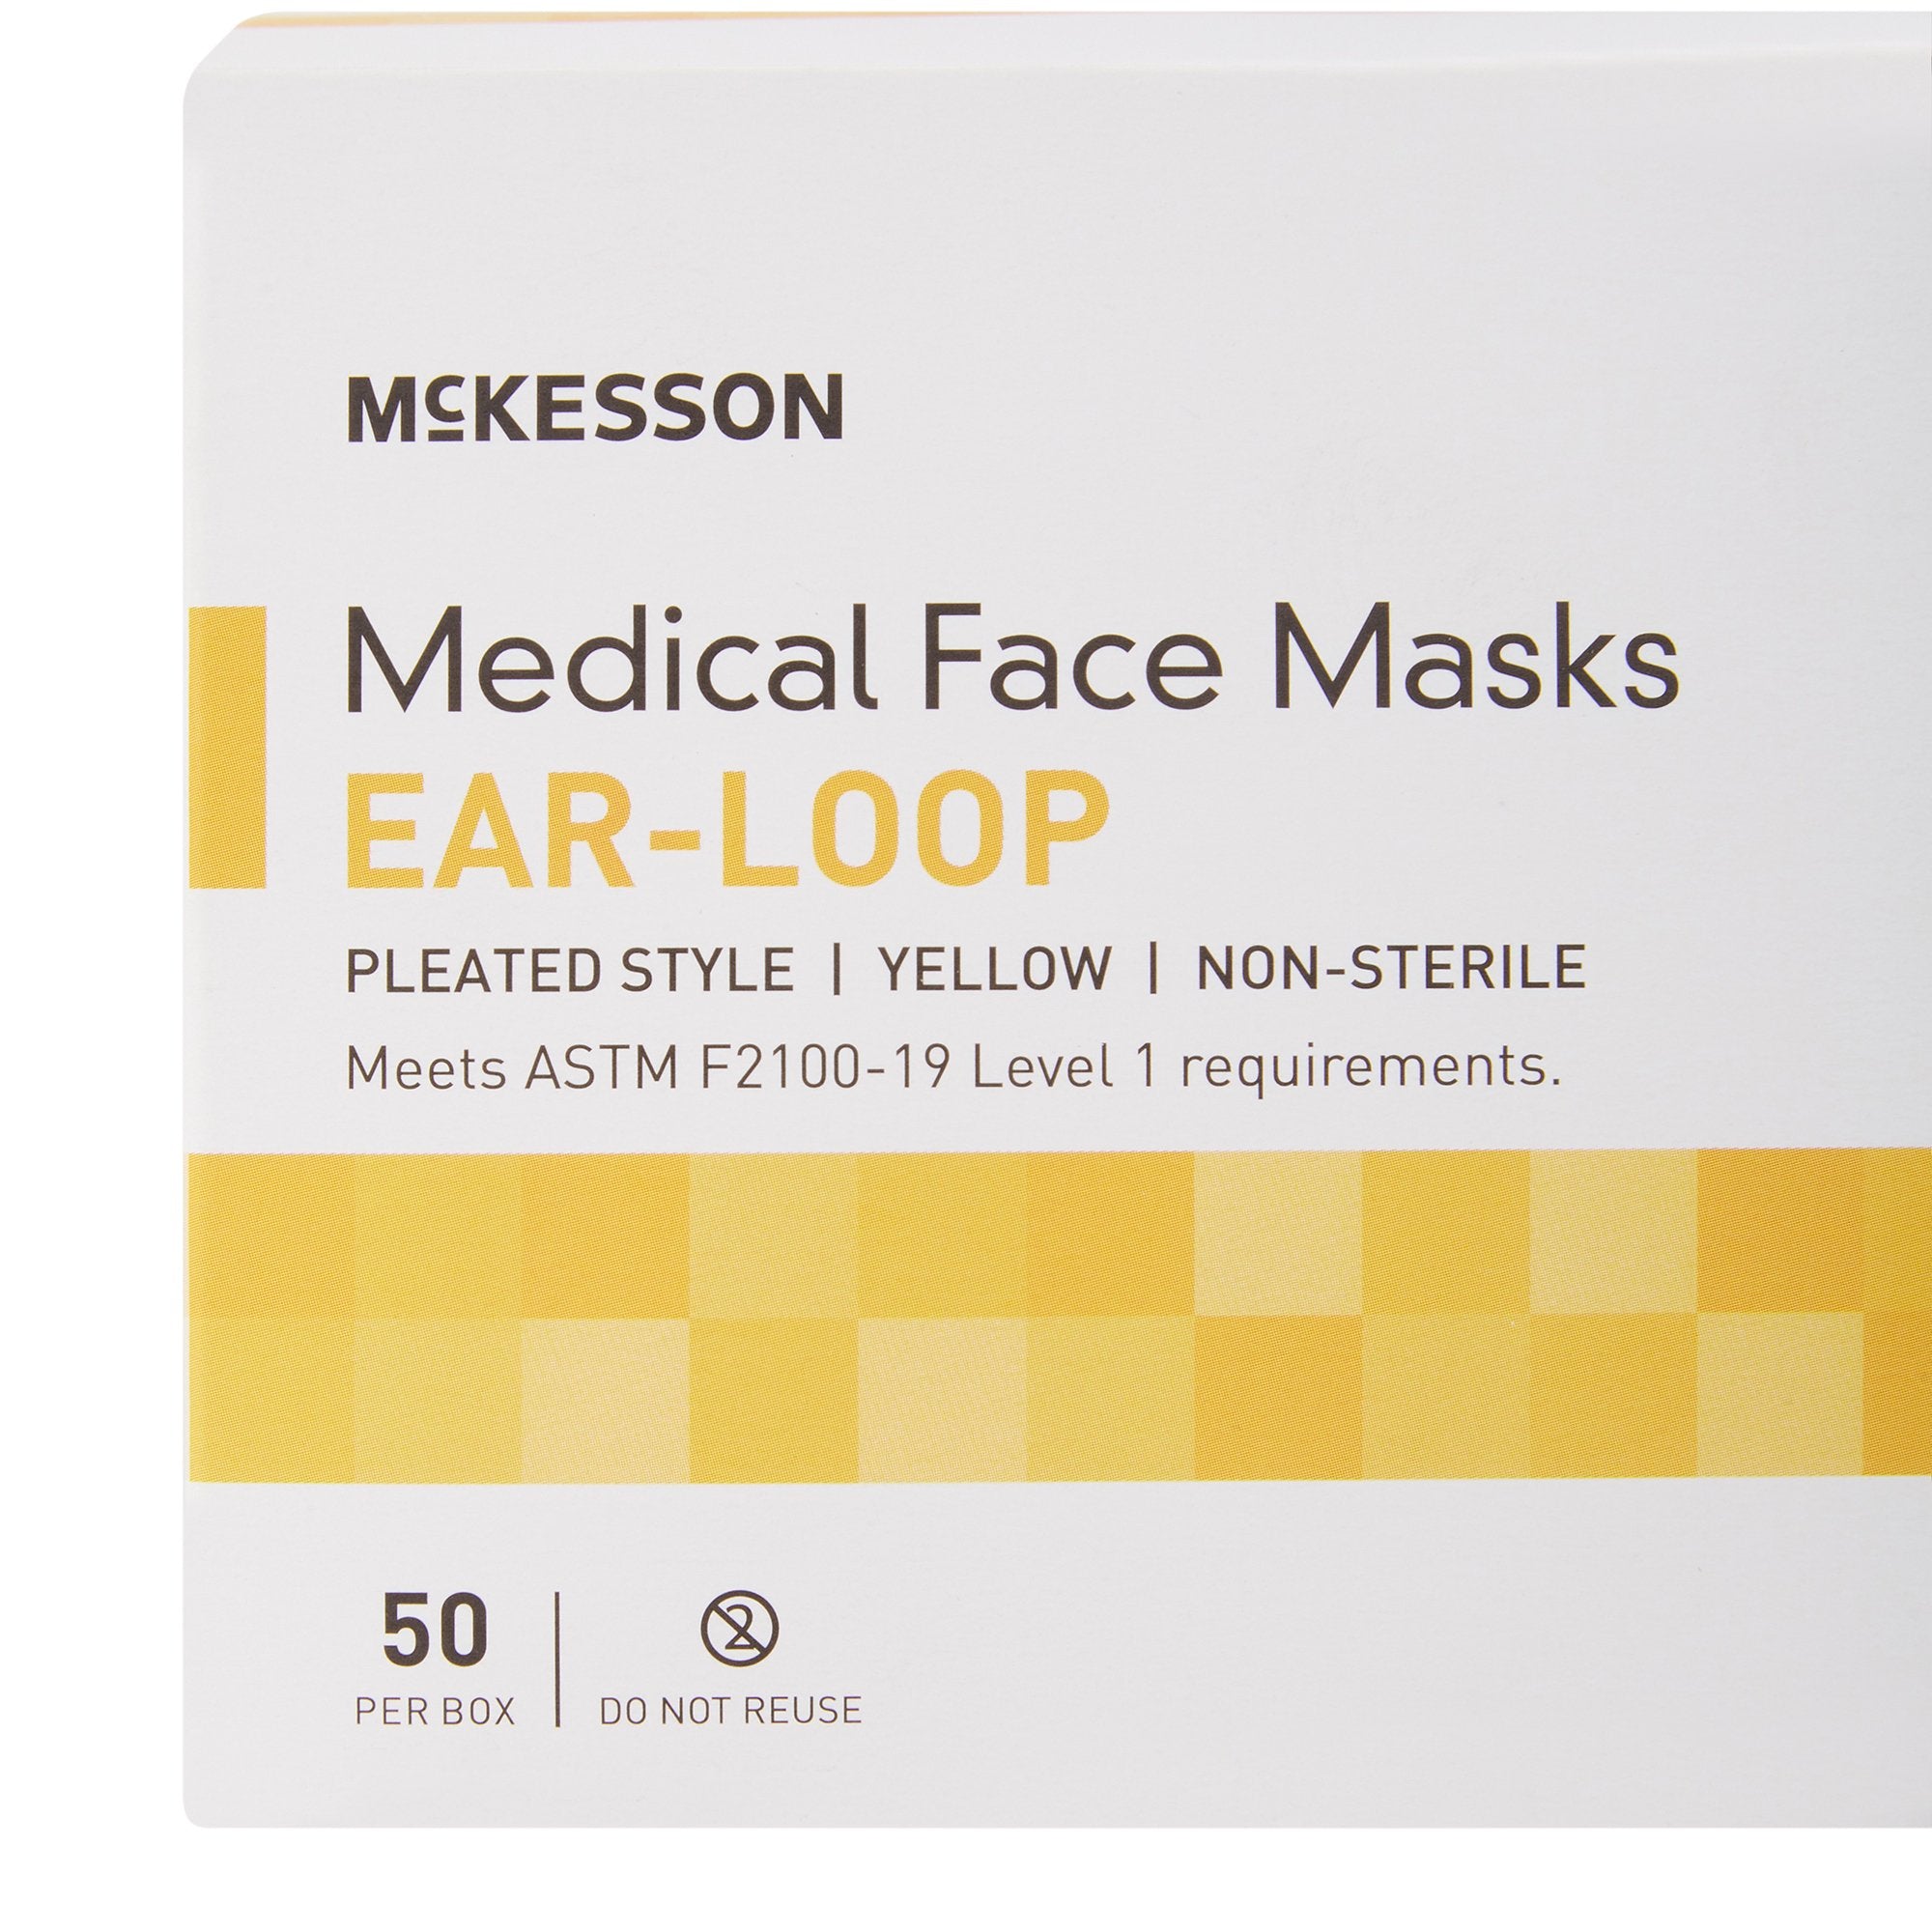 Procedure Mask McKesson Pleated Earloops One Size Fits Most Yellow NonSterile ASTM Level 1 Adult